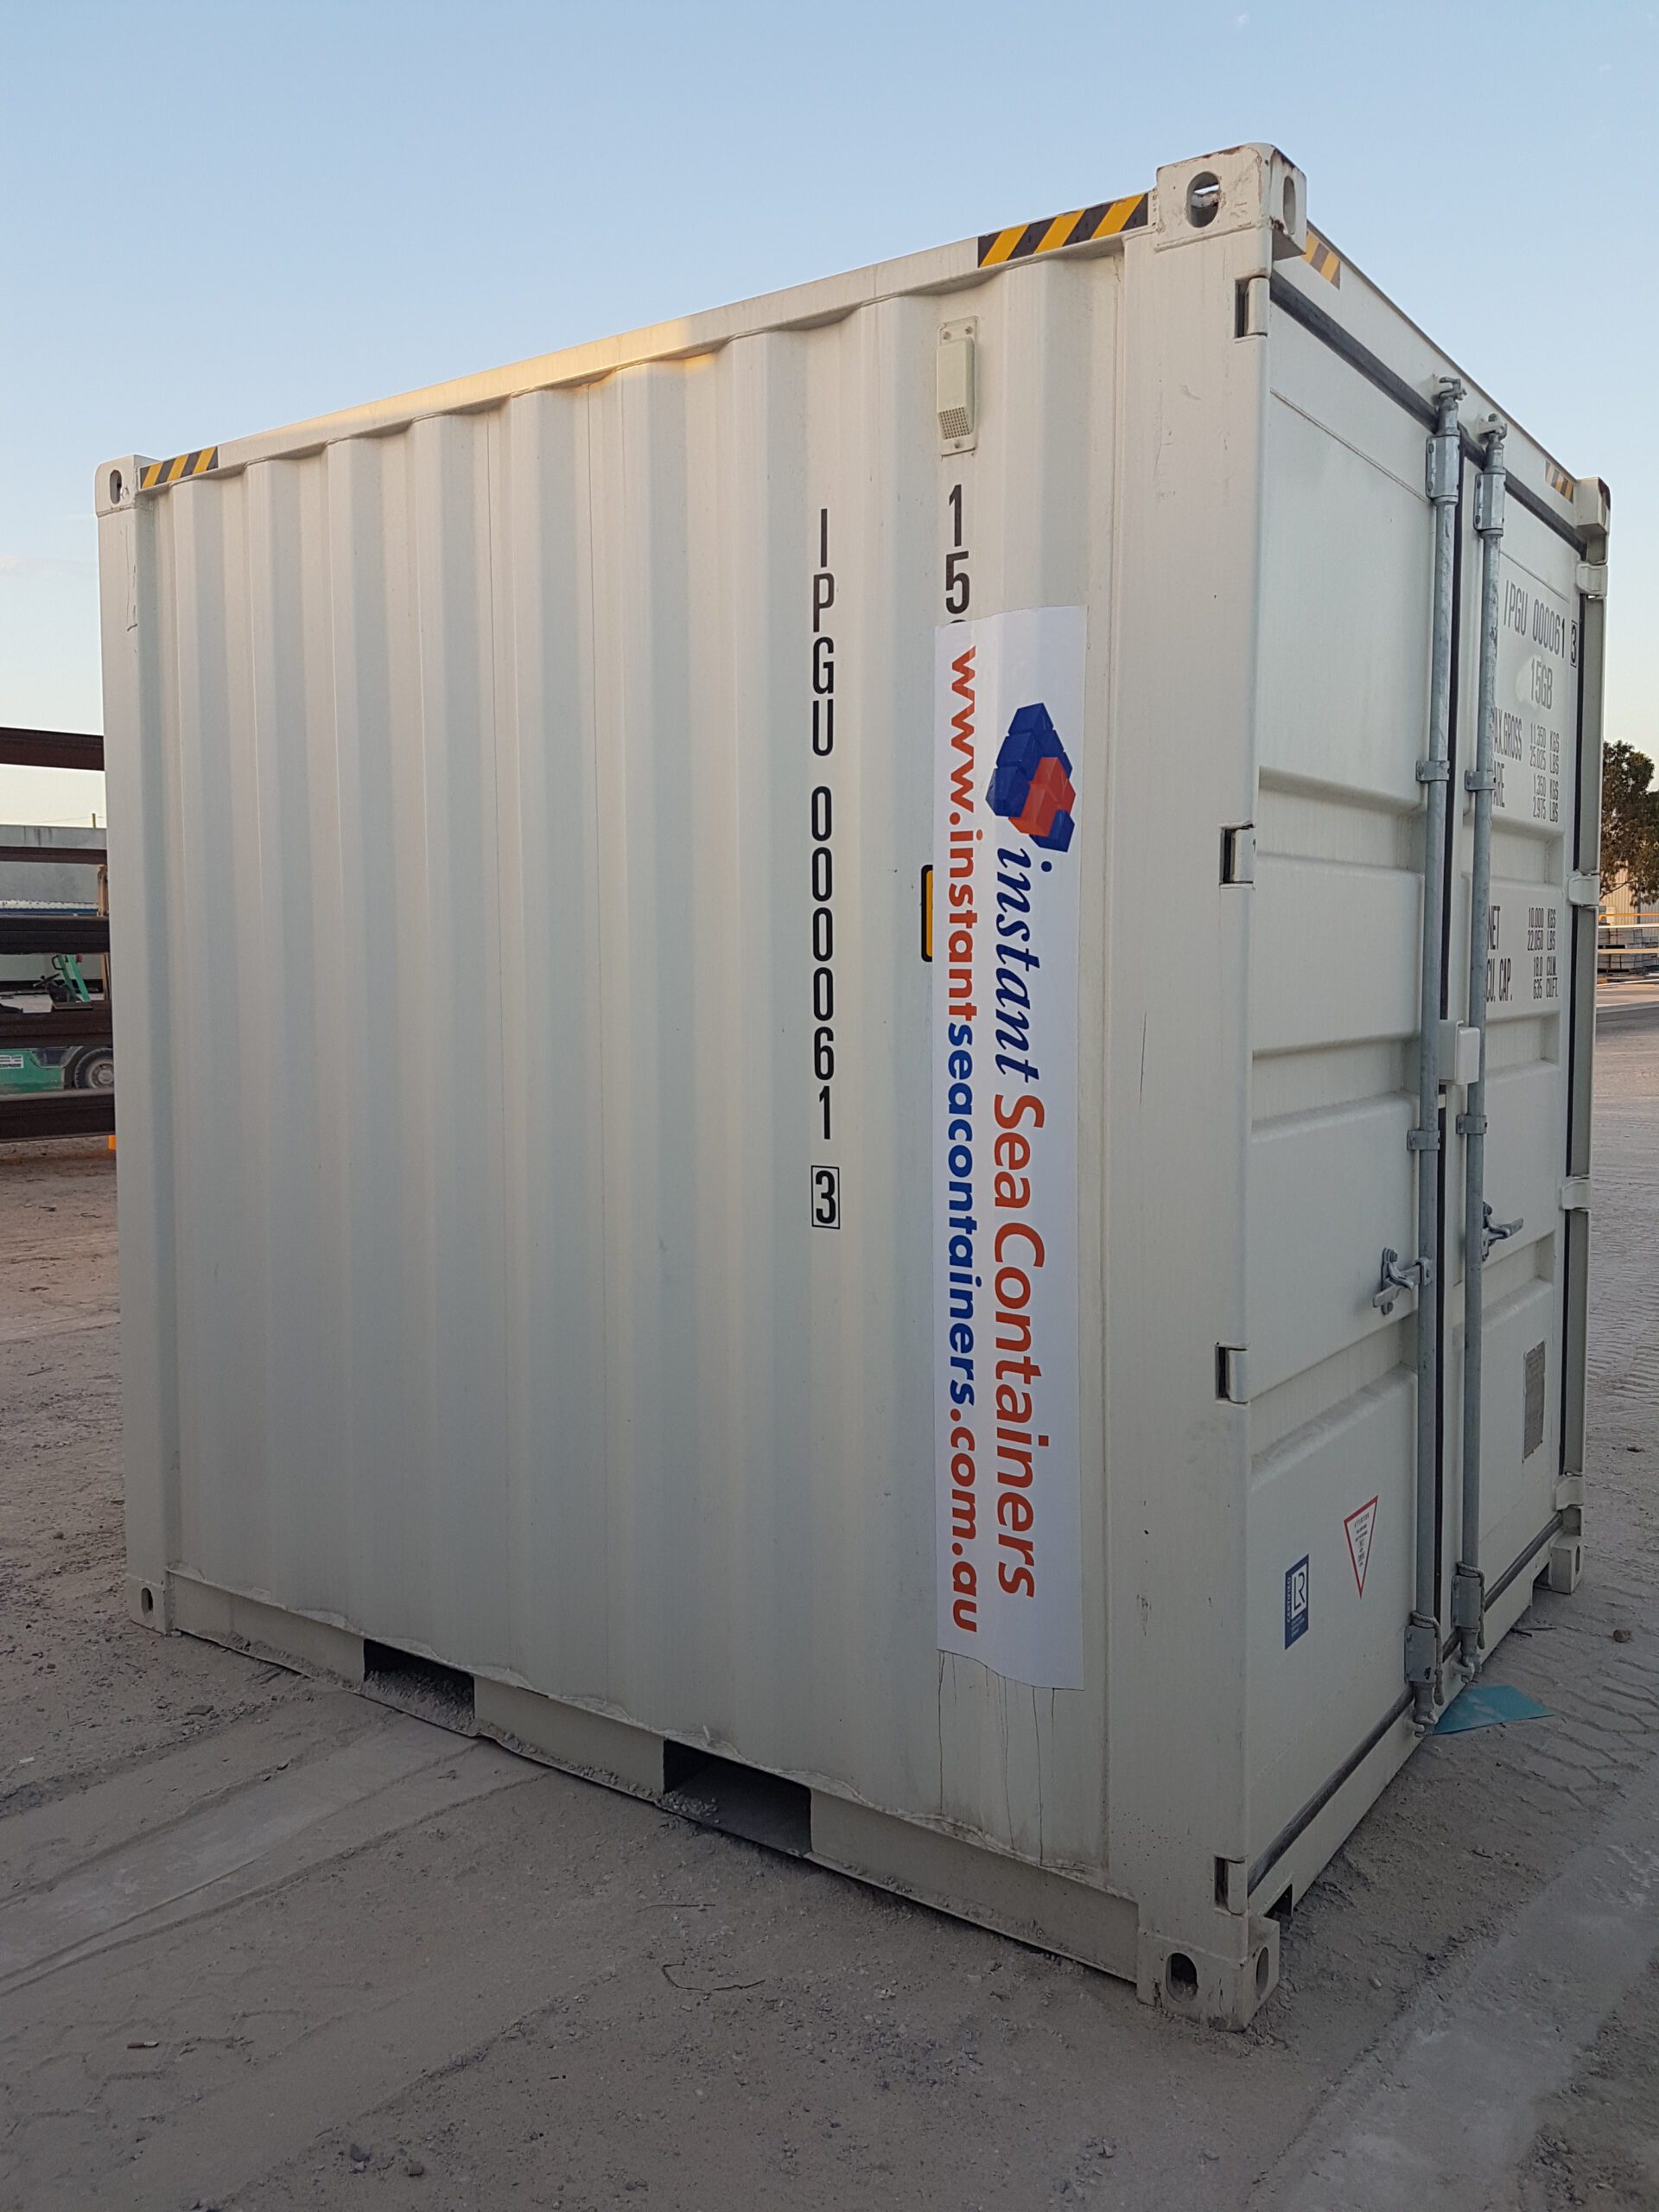 White shipping container with company branding and safety stripes, positioned on a sandy ground during twilight.